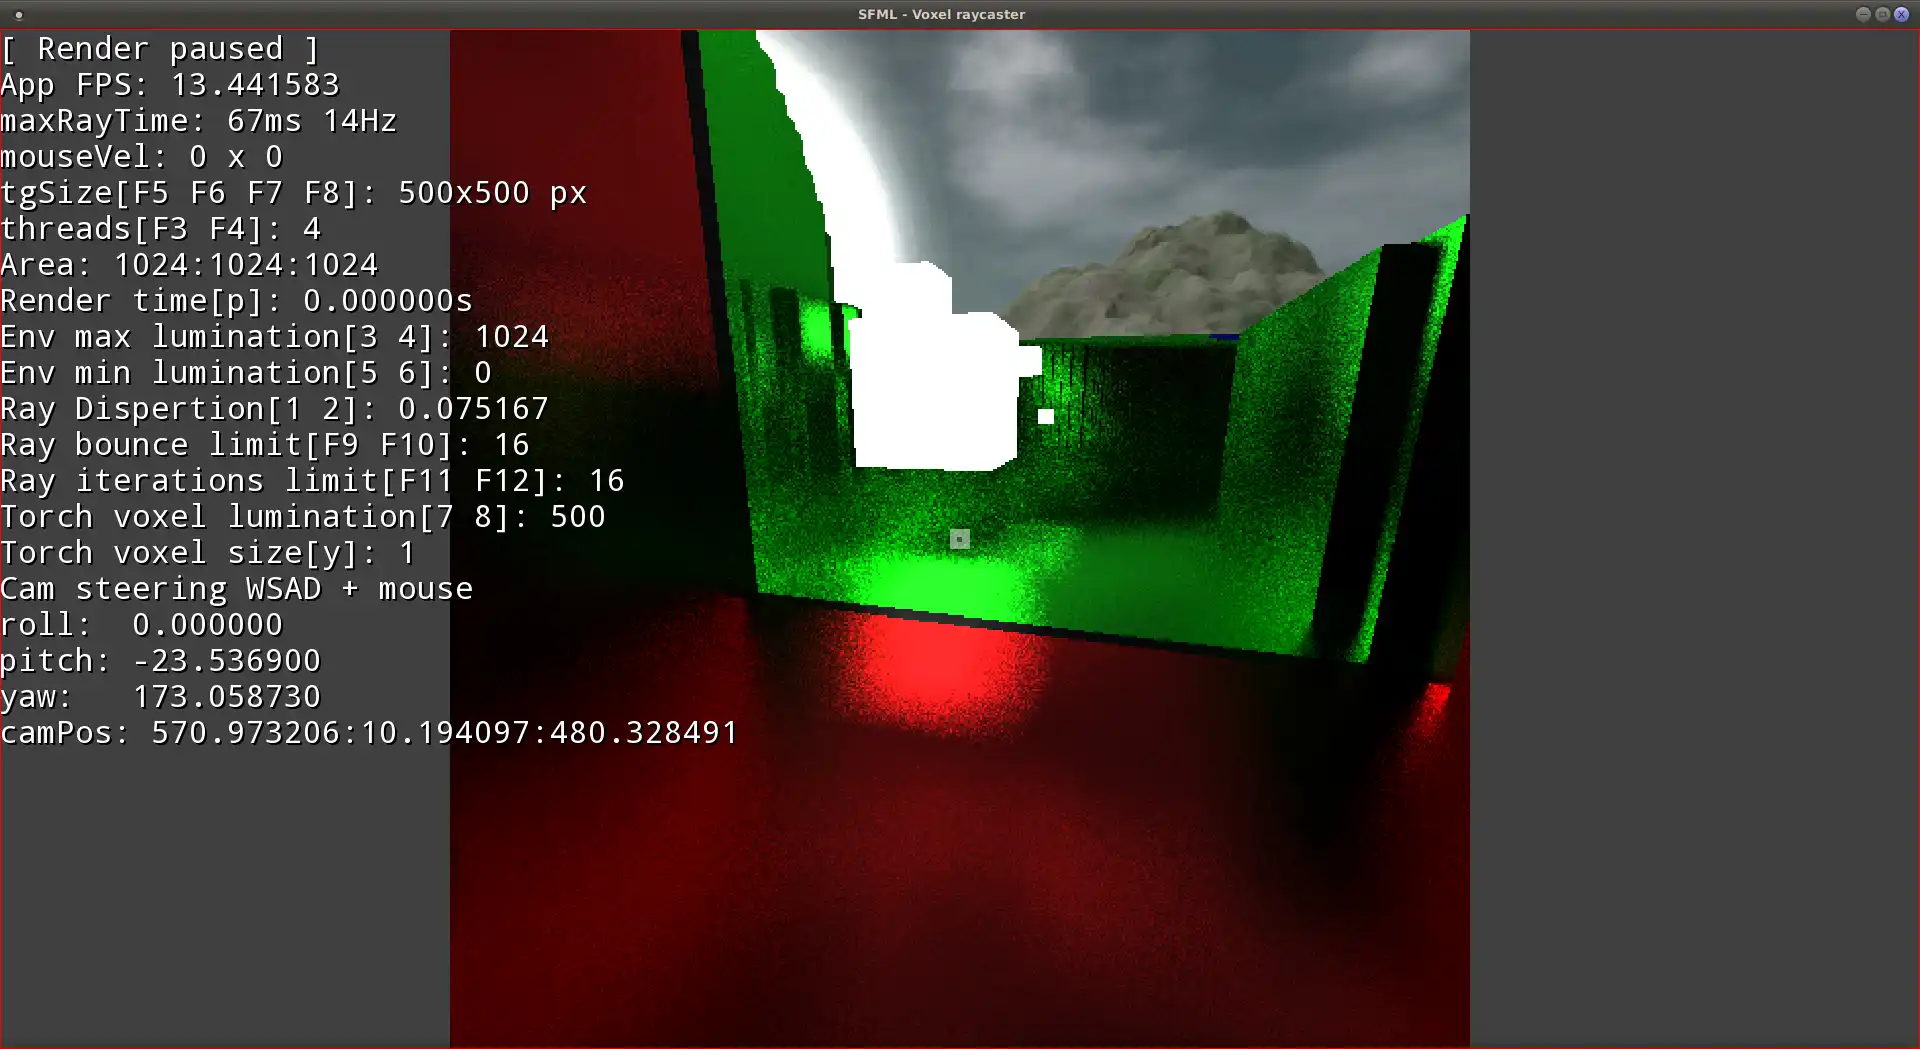 Download web tool or web app SFML Voxel Raycaster